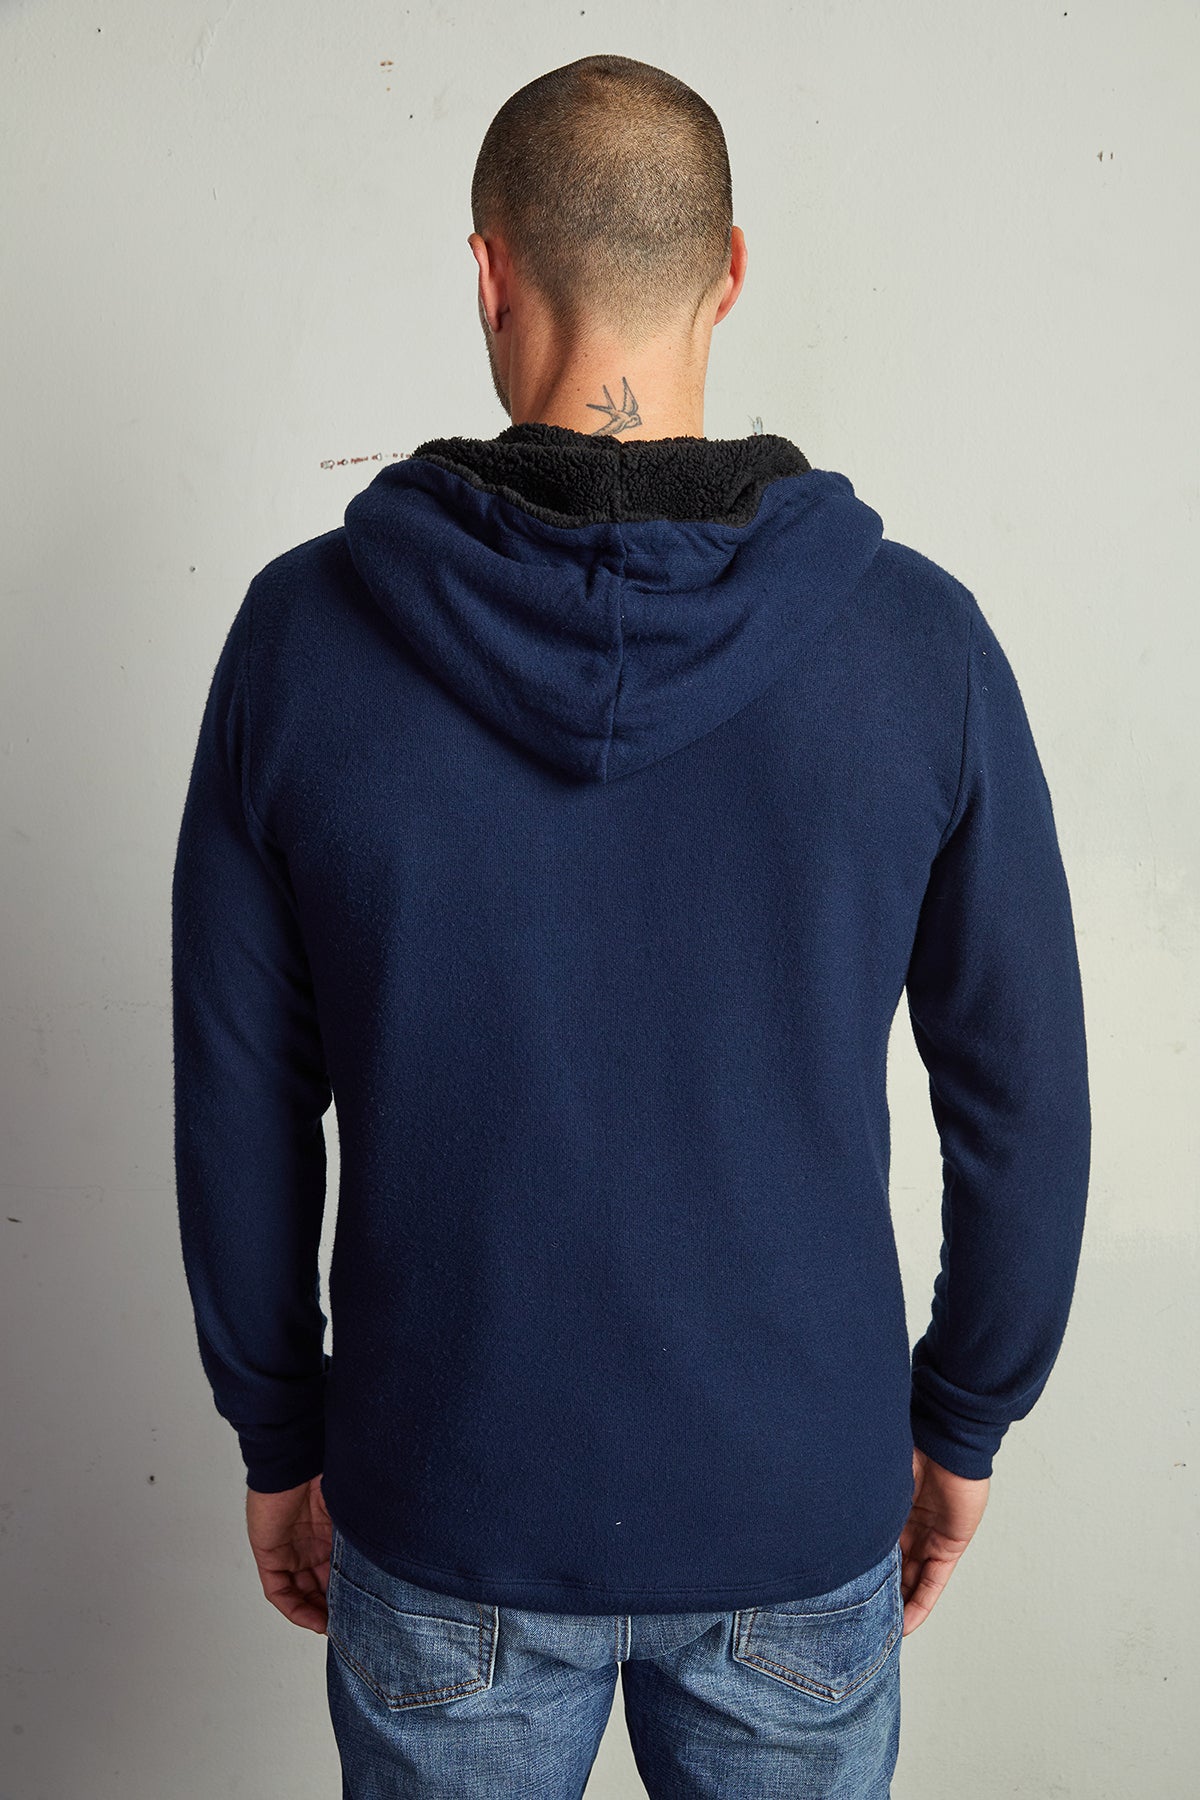   The back of a man wearing a Velvet by Graham & Spencer SALVADORE SHERPA LINED HOODIE with an adjustable drawstring hood and jeans. 